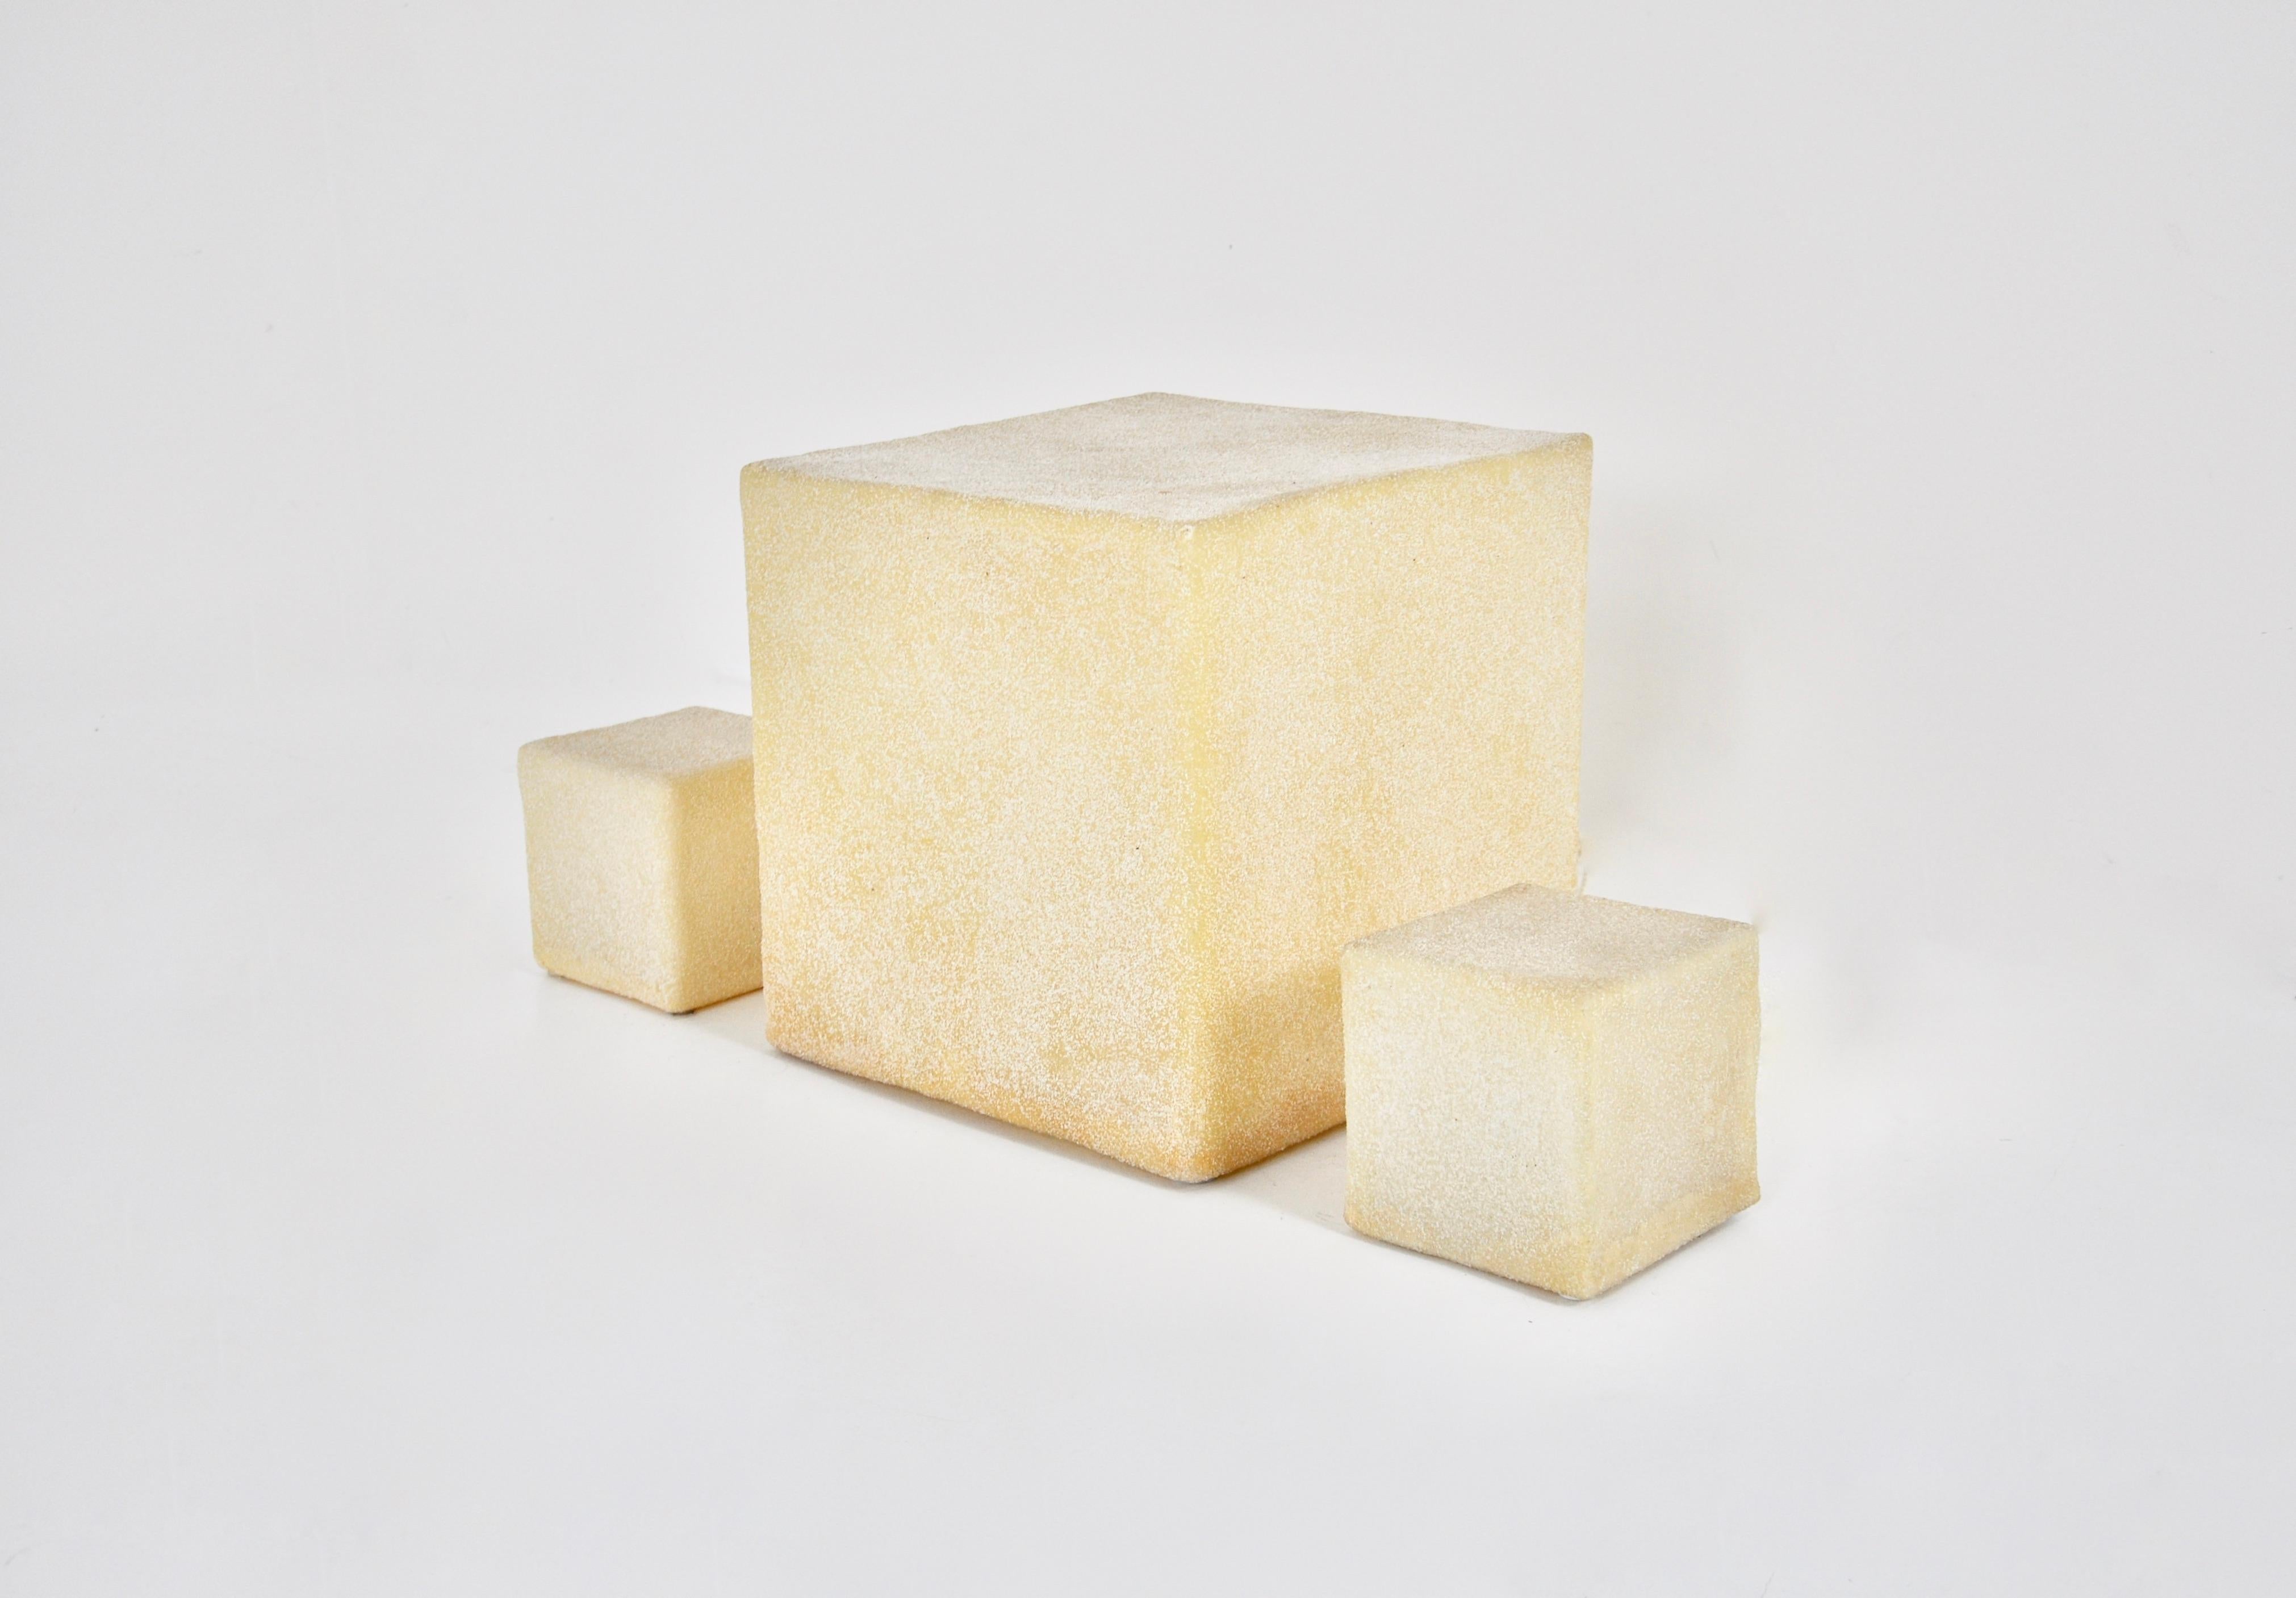 Set of 3 Cube-shaped in fiberglass and marble powder lamps by André Cazenave for Singleton. Stamped under the lamp. 
Dimensions: Large: H: 37 cm W: 37 cm D: 37 cm. 
Small: H: 16 cm W: 16 cm D: 16 cm
Wear due to time and age of lamps